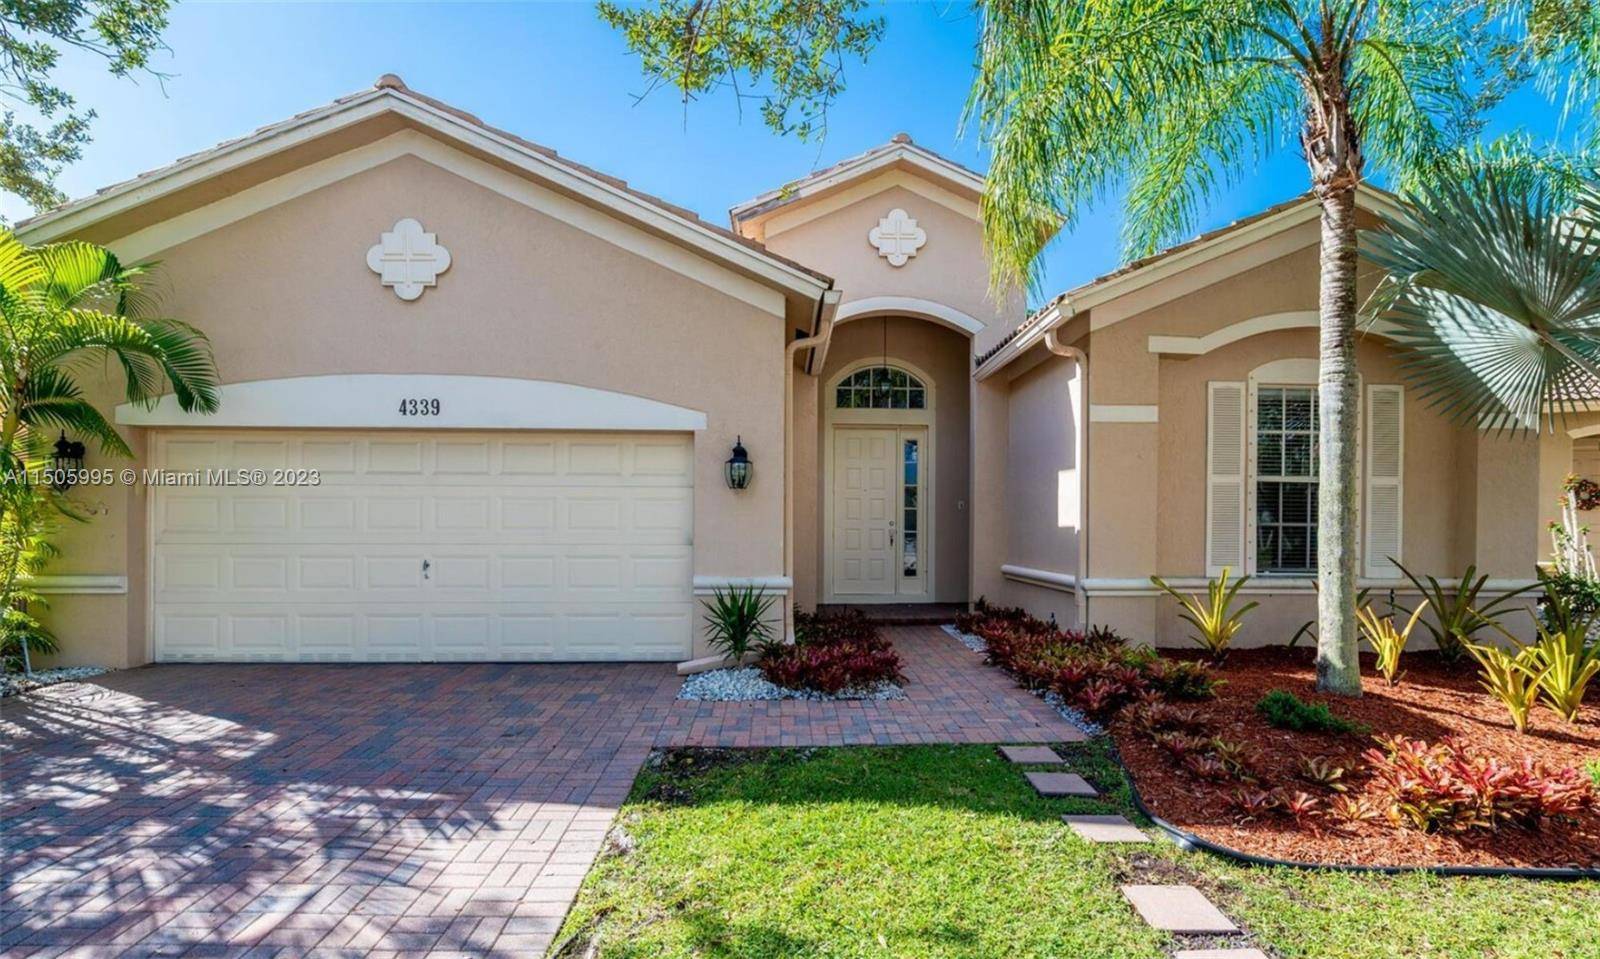 Spectacular 4Bed, 3Baths with an oversized backyard and screened patio, nestled in a private cul de sac in the desirable gated community in Isles At Weston.